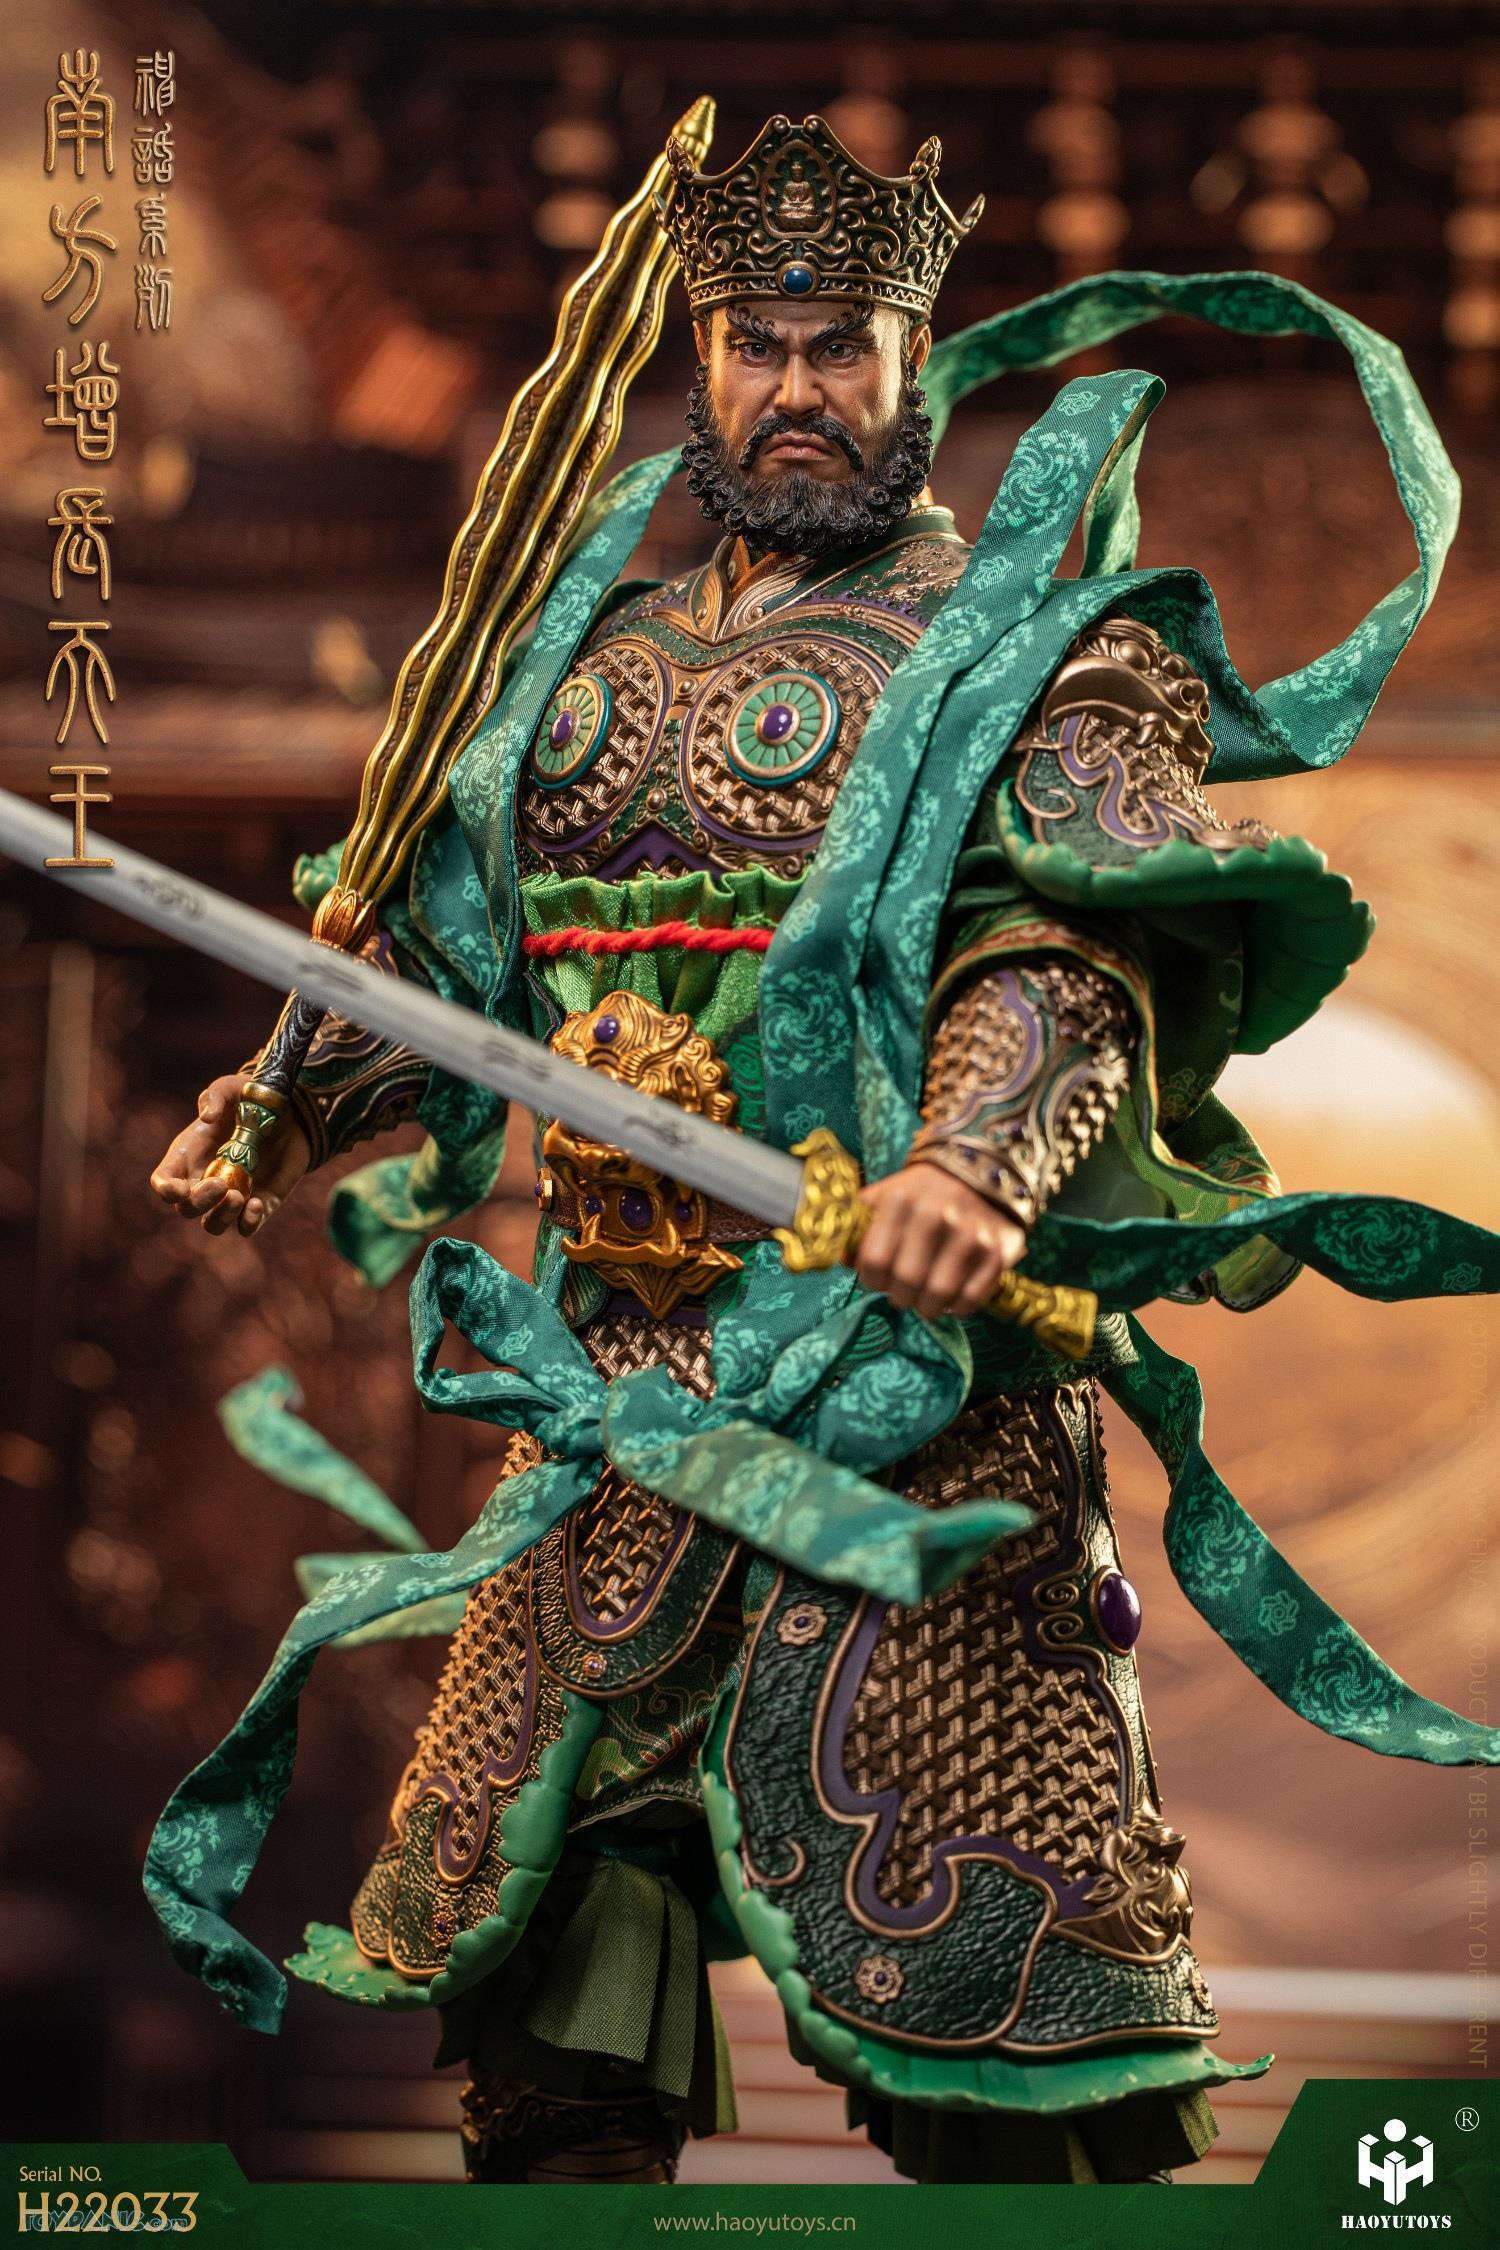 mythseries - NEW PRODUCT: HaoYuToys 1/6 Myth Series Southern Growth King 212202451837PM_5105151